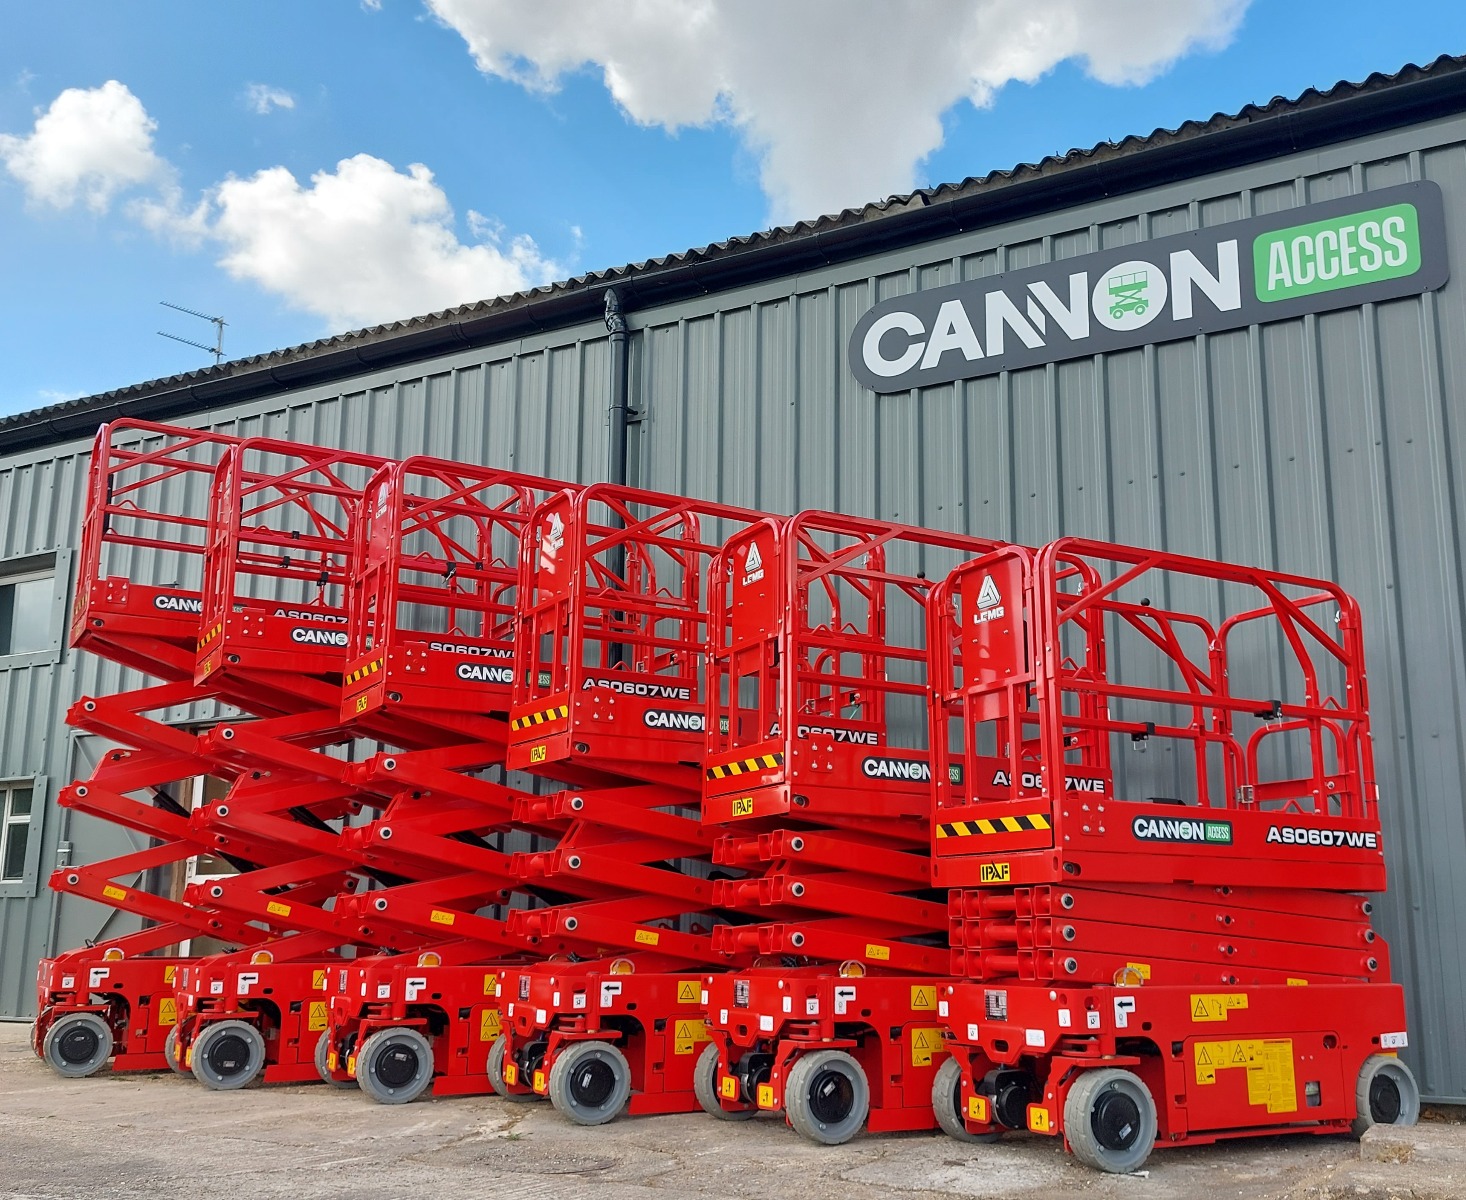 Canon Access has added LGMG scissor lifts to its fleet